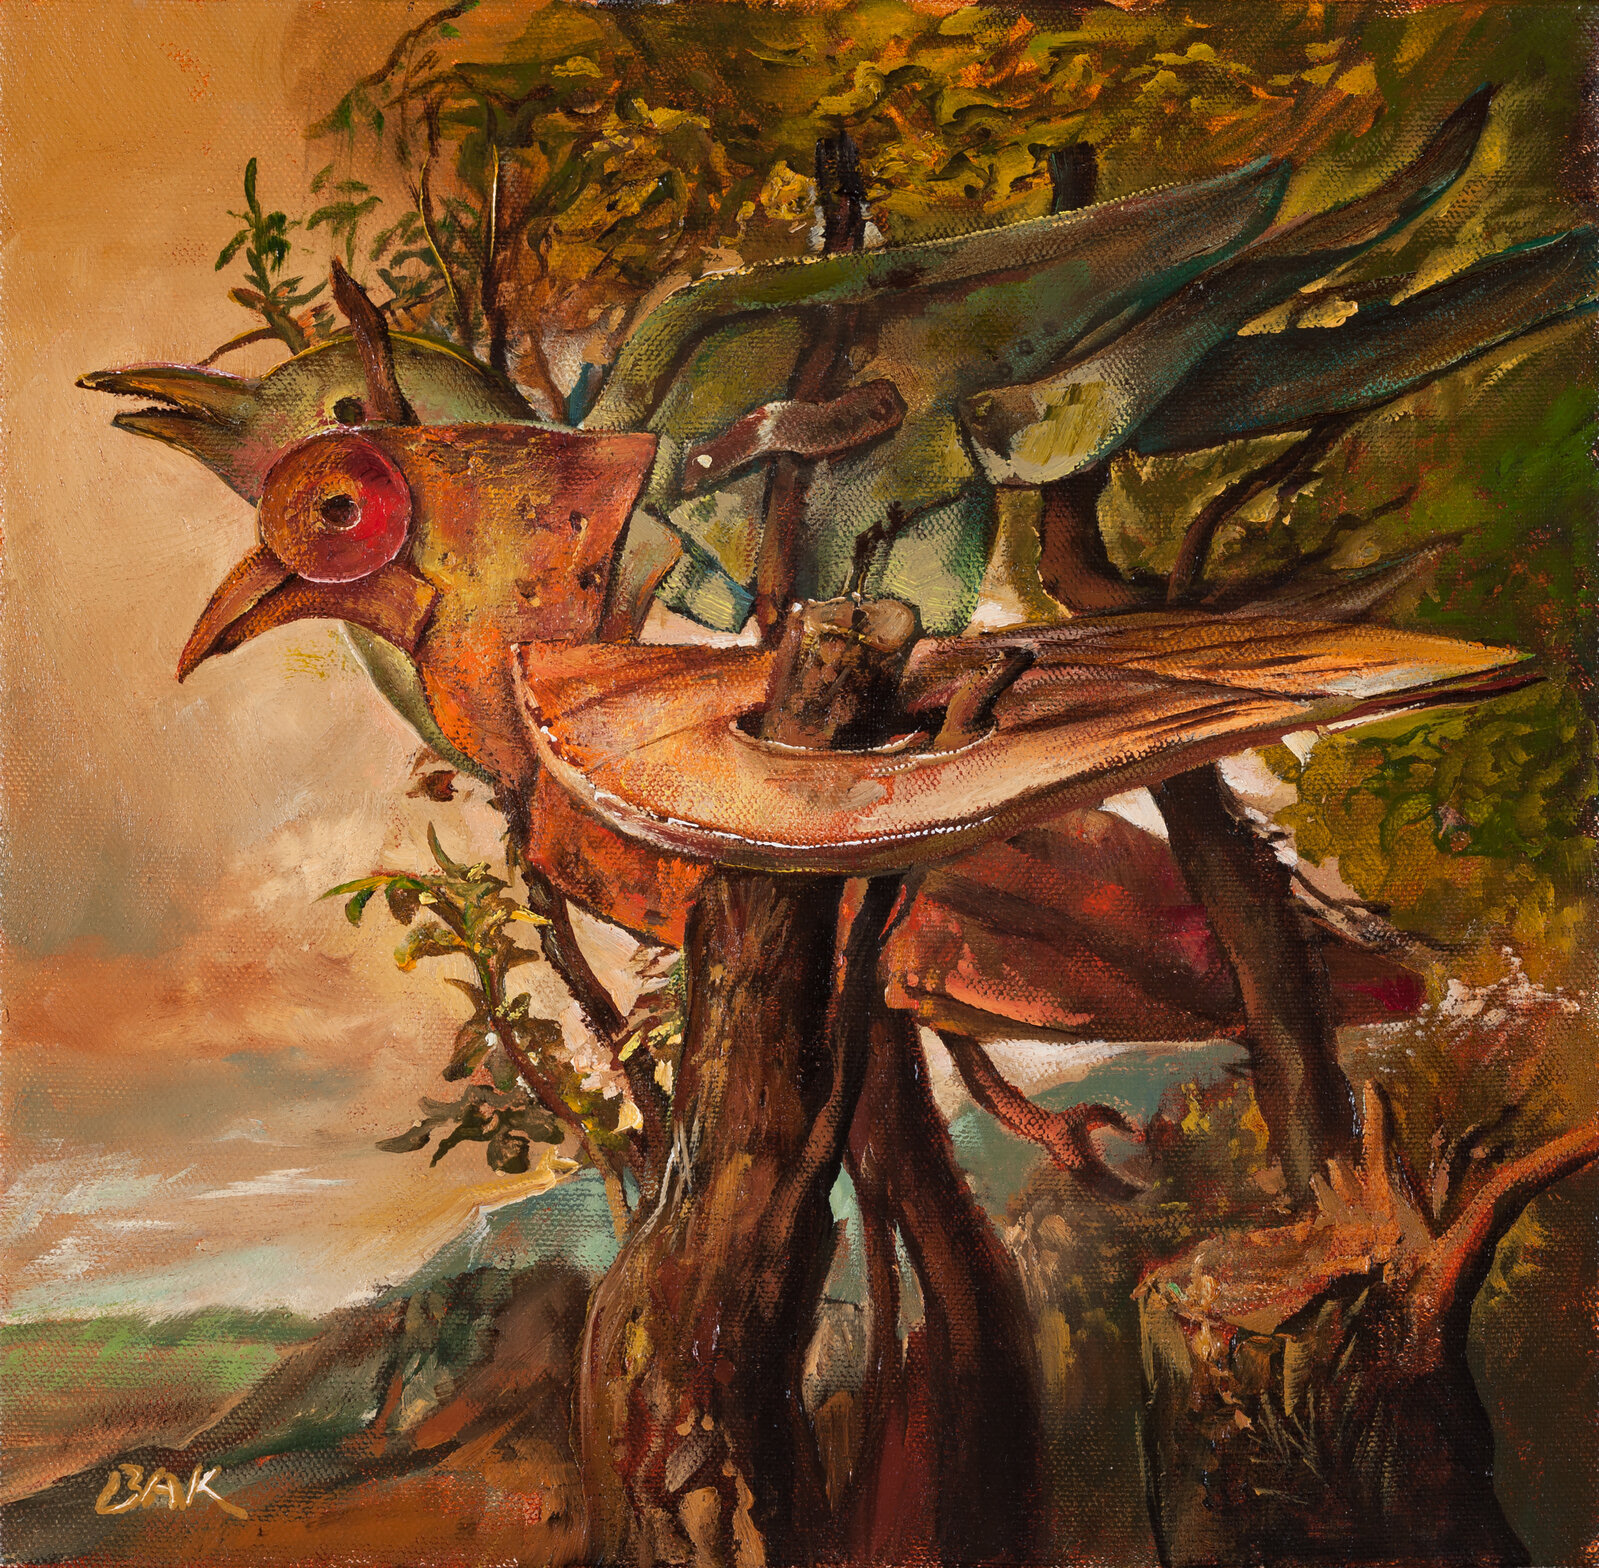 Samuel Bak | Two Birds with One Tree (2015) | Available for Sale | Artsy